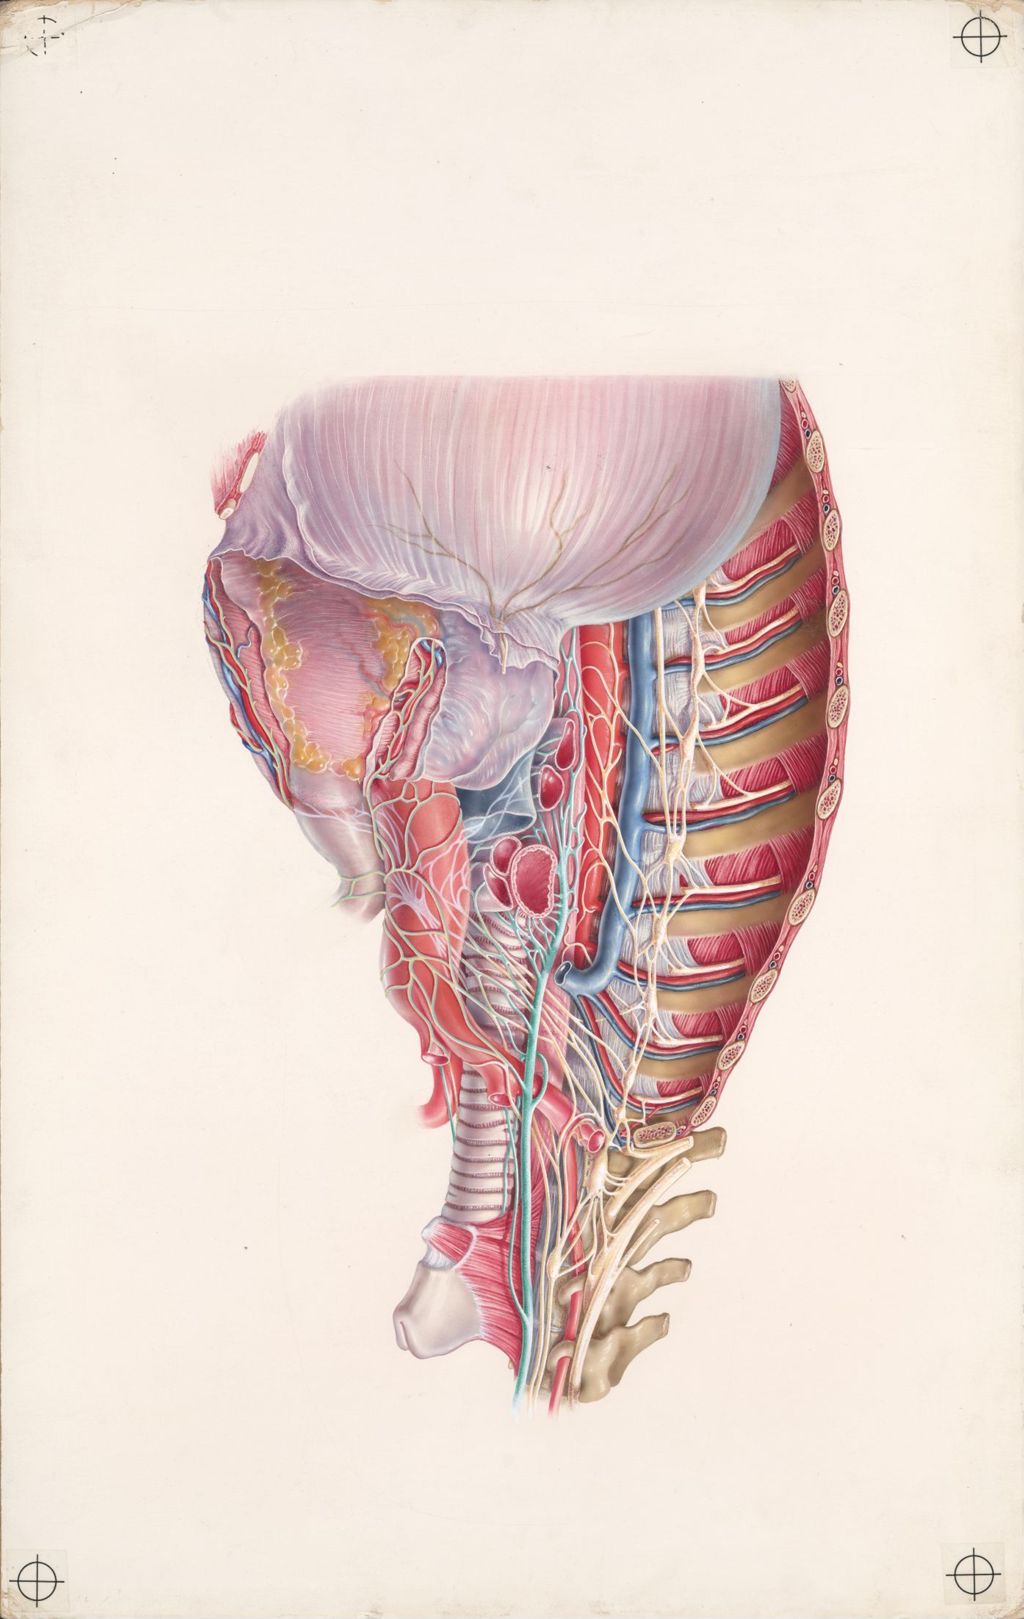 Miniature of Explanatory Atlas of Anatomy, The autonomic innervation of the heart, Plate 1, The autonomic nervous system of the thorax